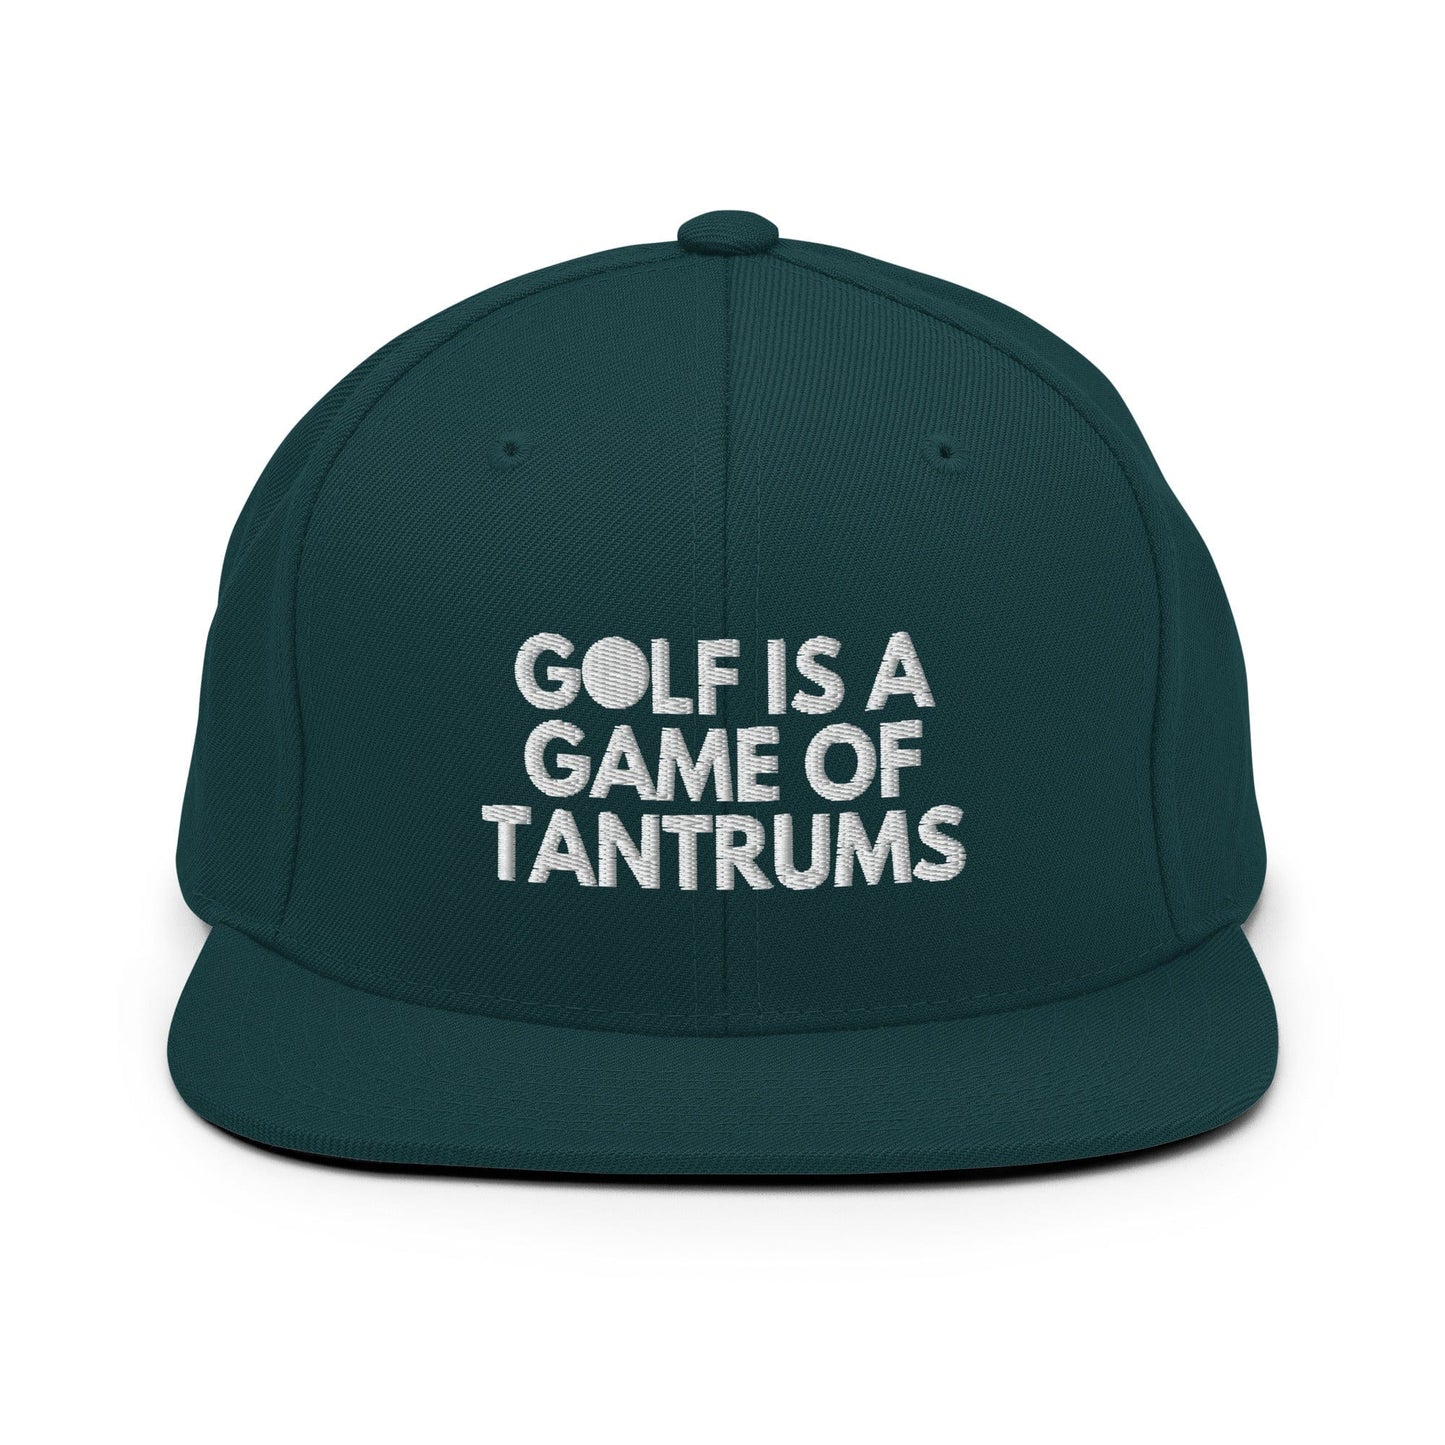 Funny Golfer Gifts  Snapback Hat Spruce Golf Is A Game Of Tantrums Hat Snapback Hat